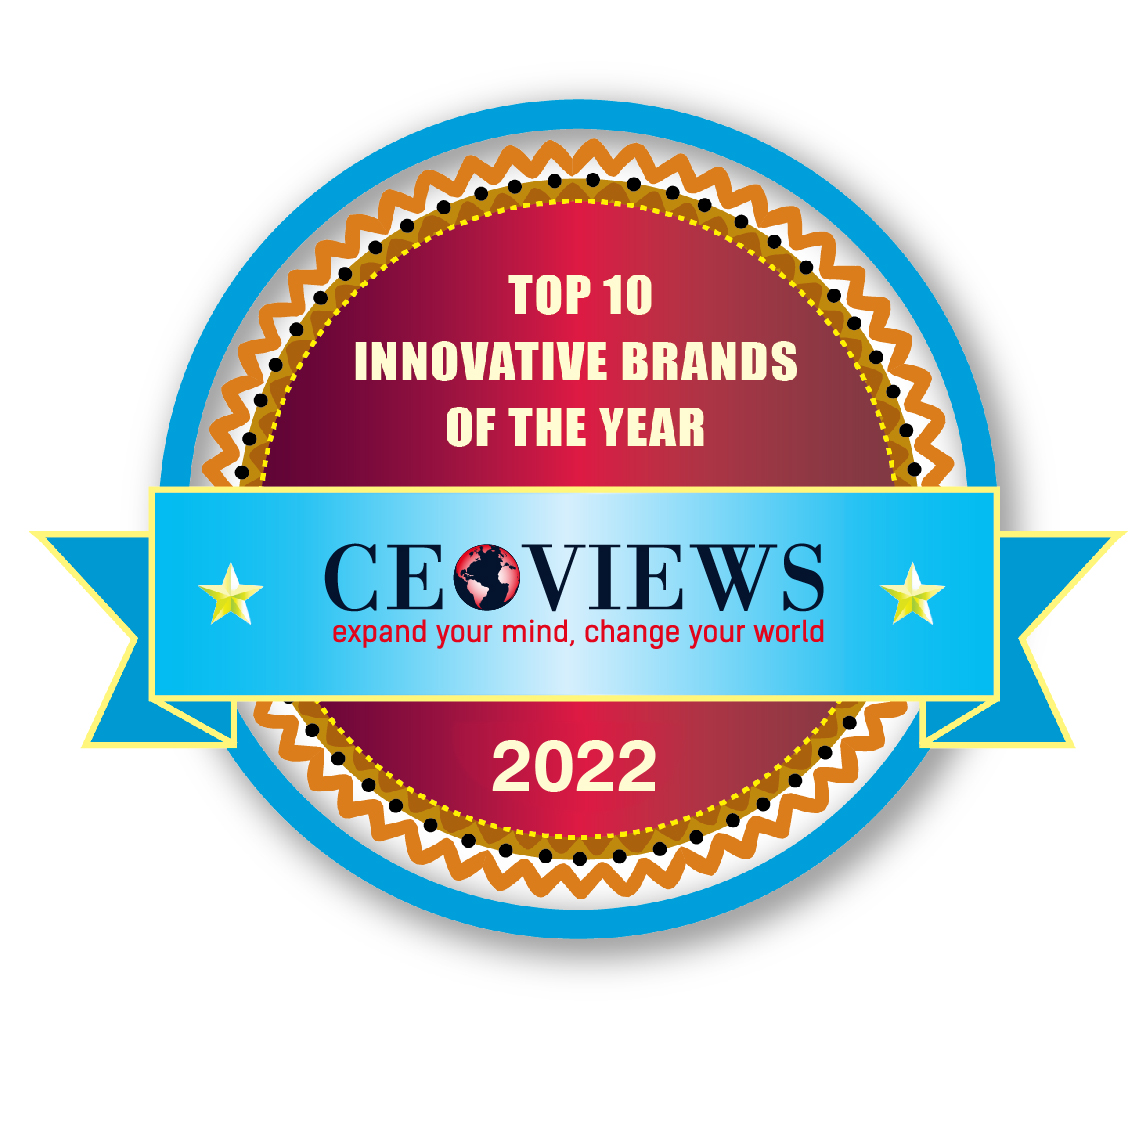 Top 10 innovative brands of the year 2020